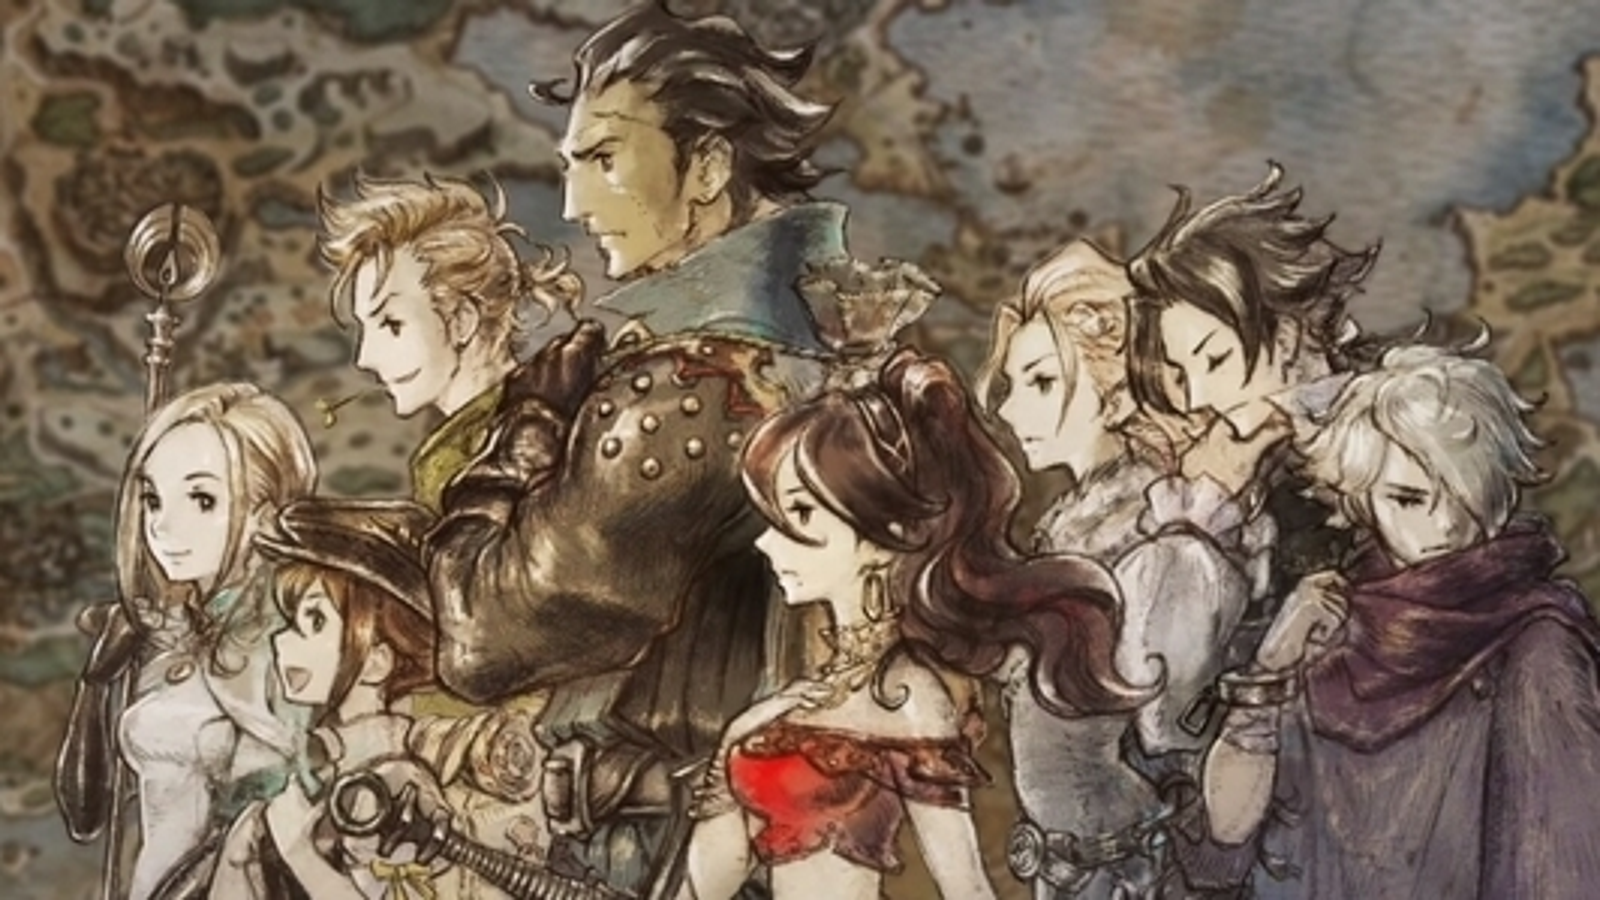 Square Enix Announces Octopath Traveler: Champions Of The